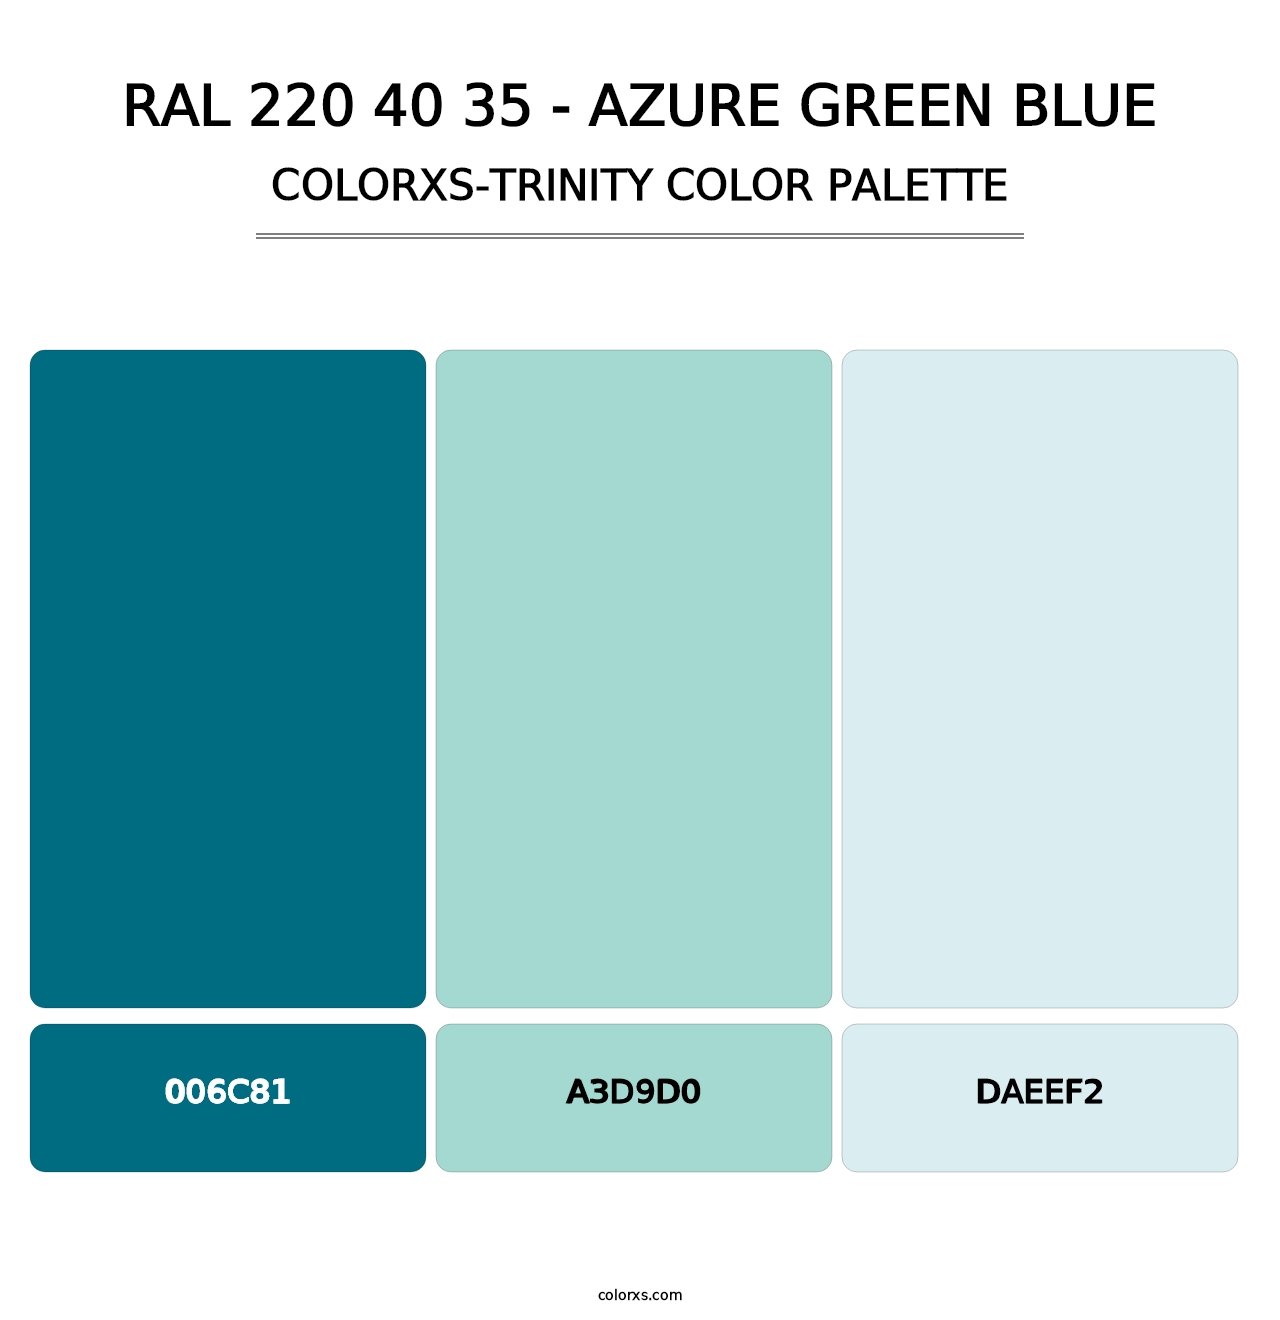 RAL 220 40 35 - Azure Green Blue - Colorxs Trinity Palette